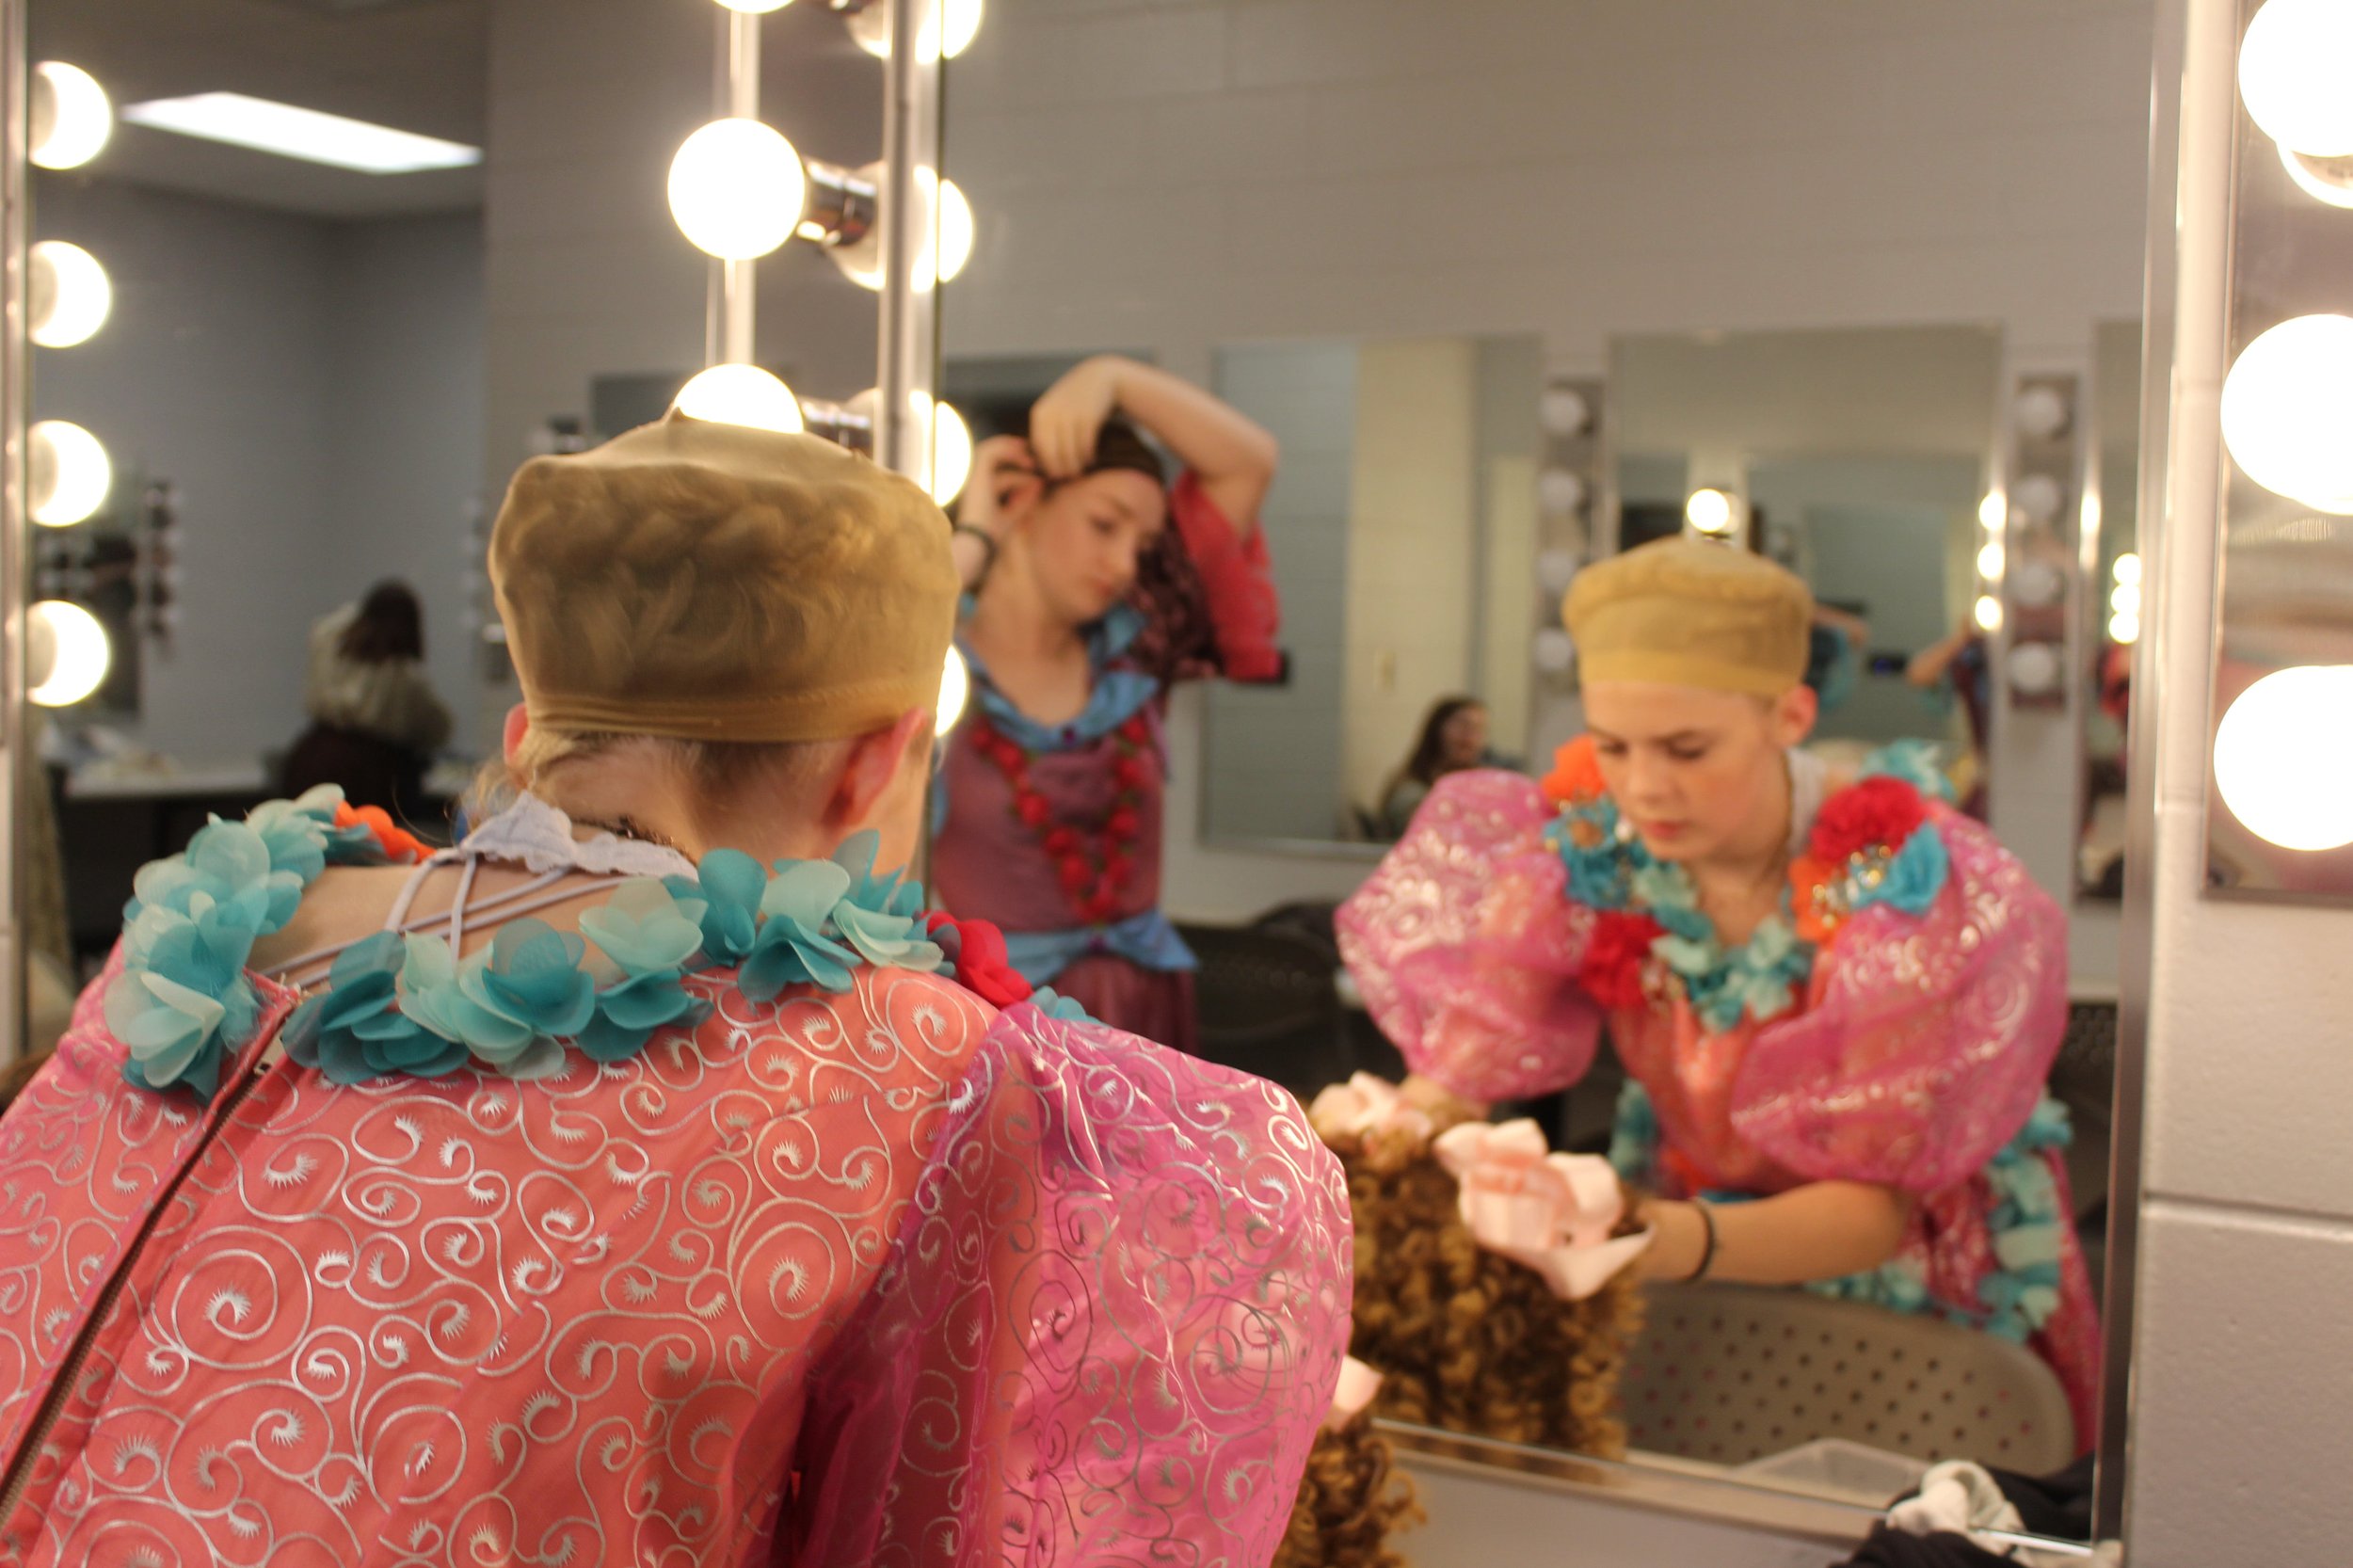  Elizabeth Mullis (12) gets ready to put her wig on for dress rehearsal. She plays one of Cinderella’s evil stepsisters in the “Into the Woods” one-act play. 